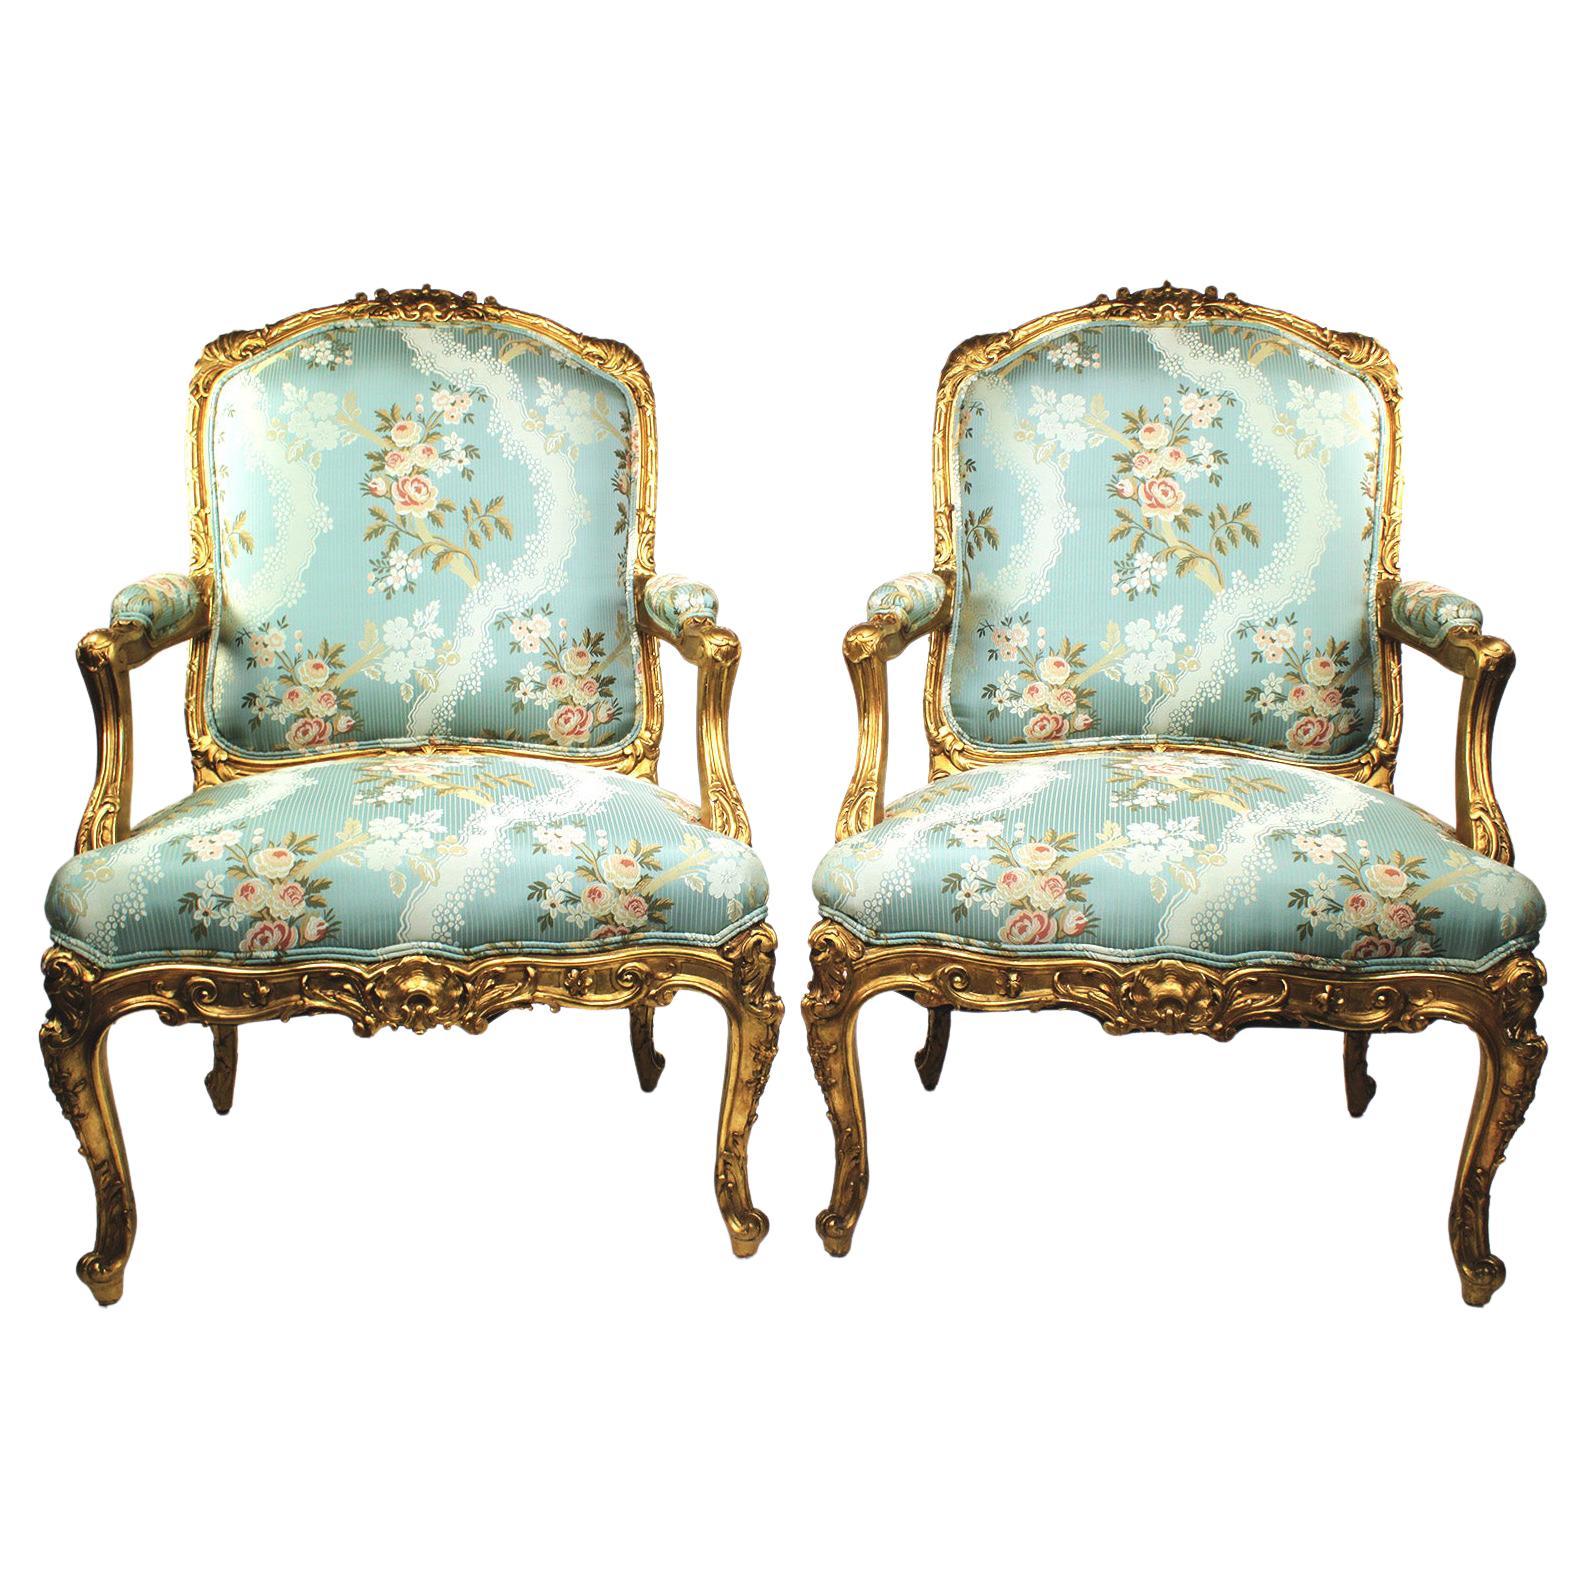 Very Fine Pair of French 19th Century Louis XV Style Giltwood Carved Armchairs